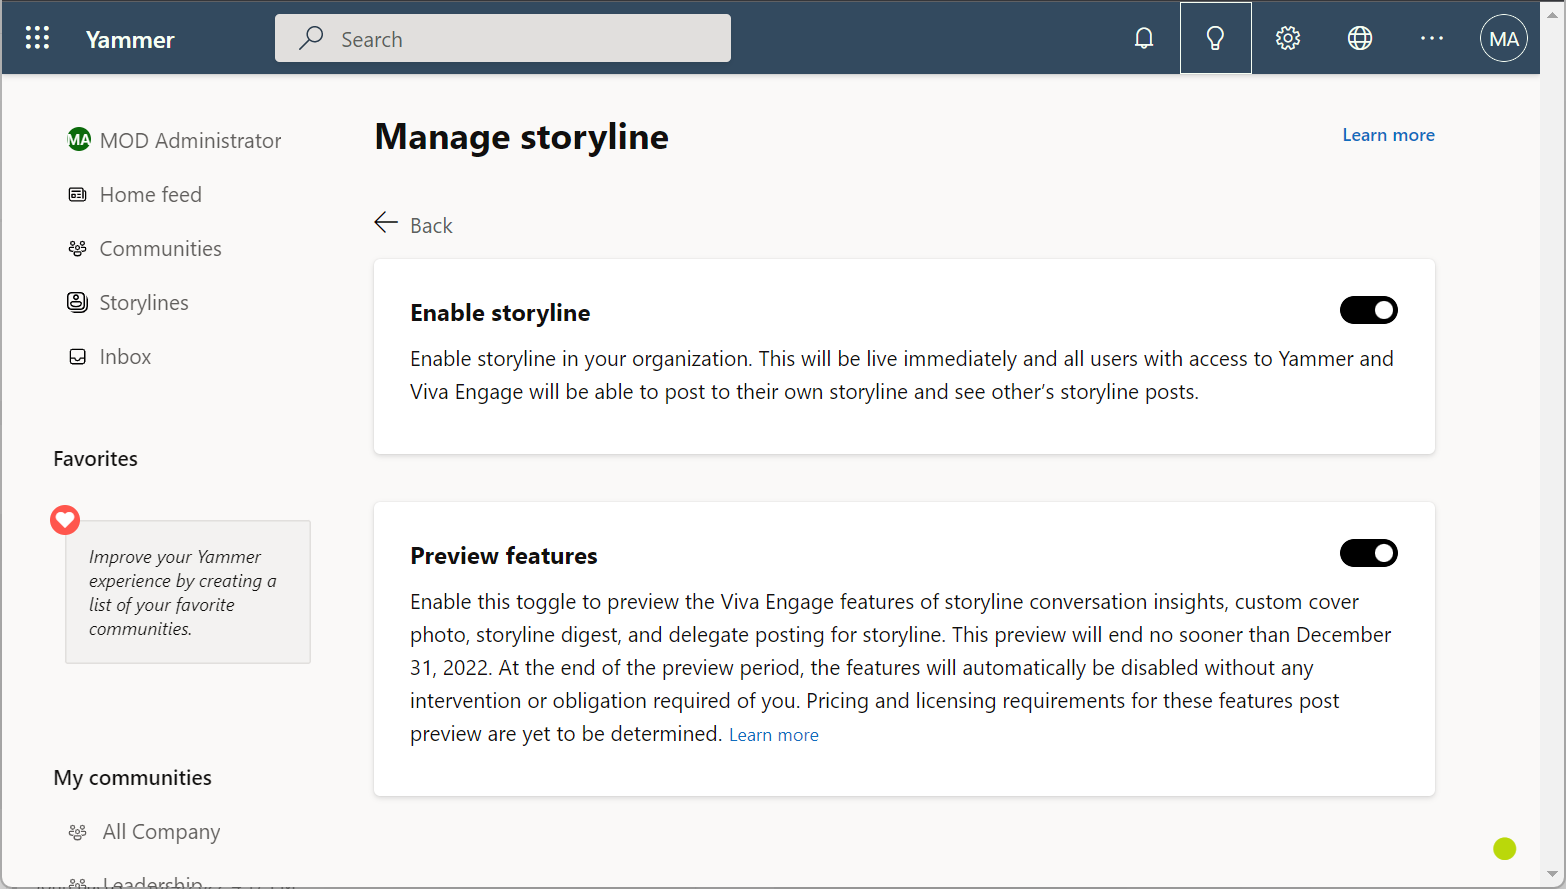 If you access this page after storyline has reached general availability, you will see a toggle to Enable storyline which you can use to control the availability of storyline.